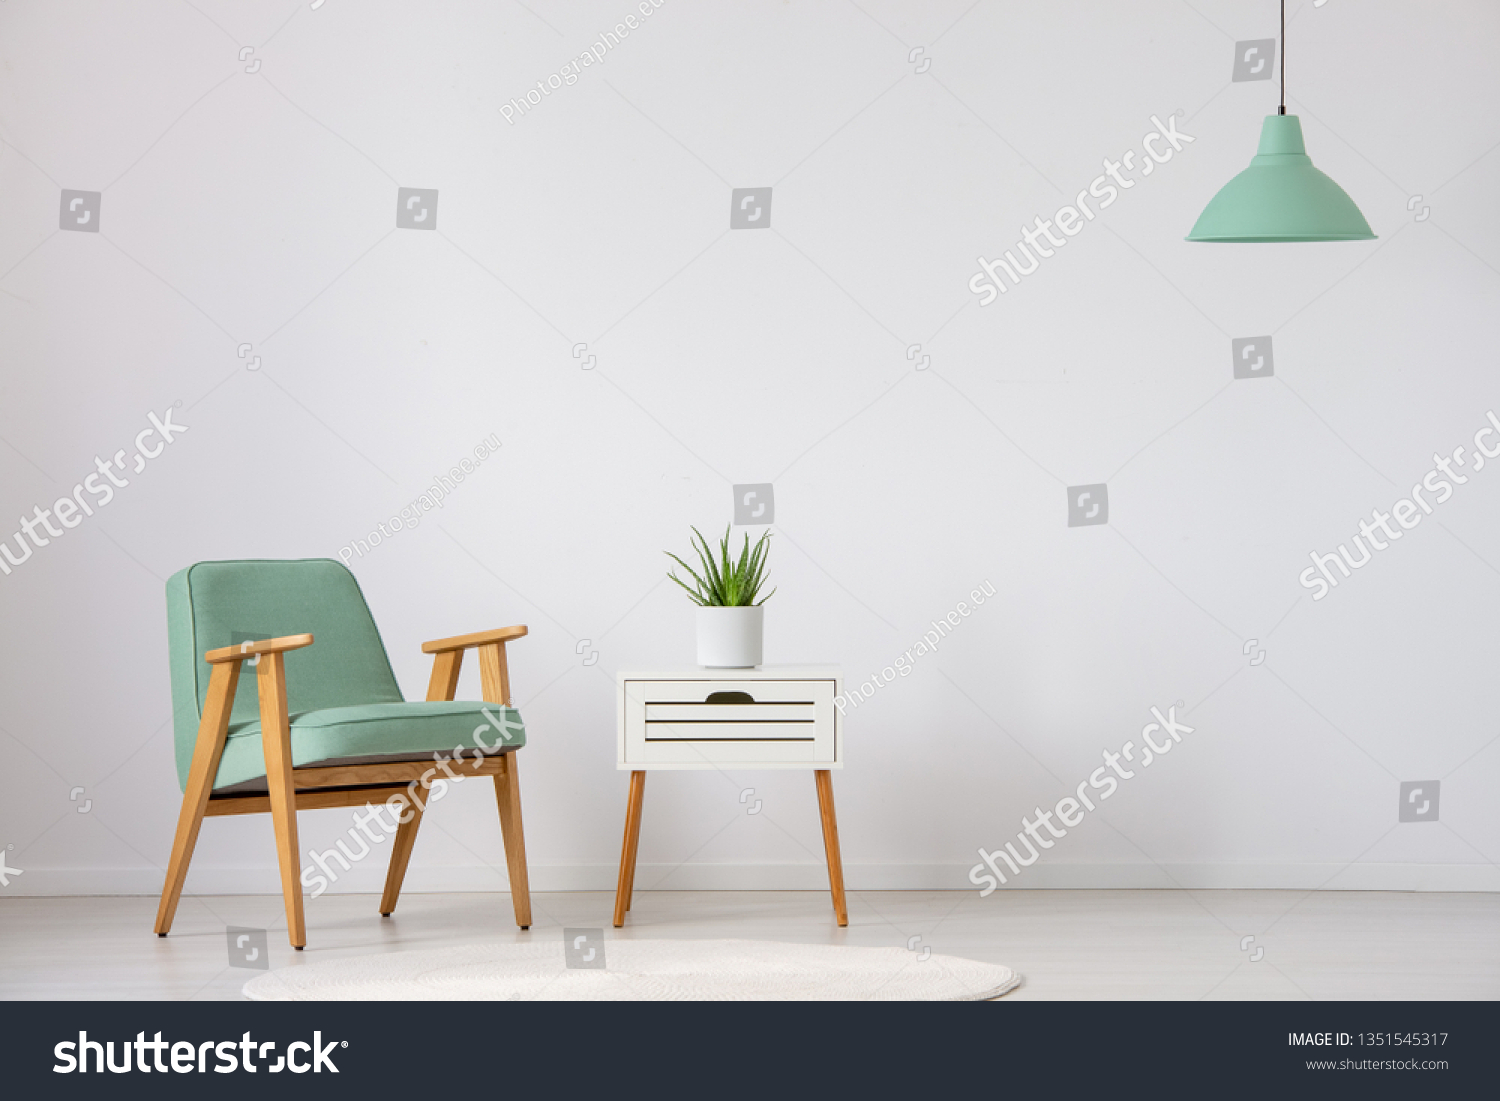 Vintage mint armchair next to small white table with green plant in pot in bright interior, real photo with copy space on the empty wall #1351545317